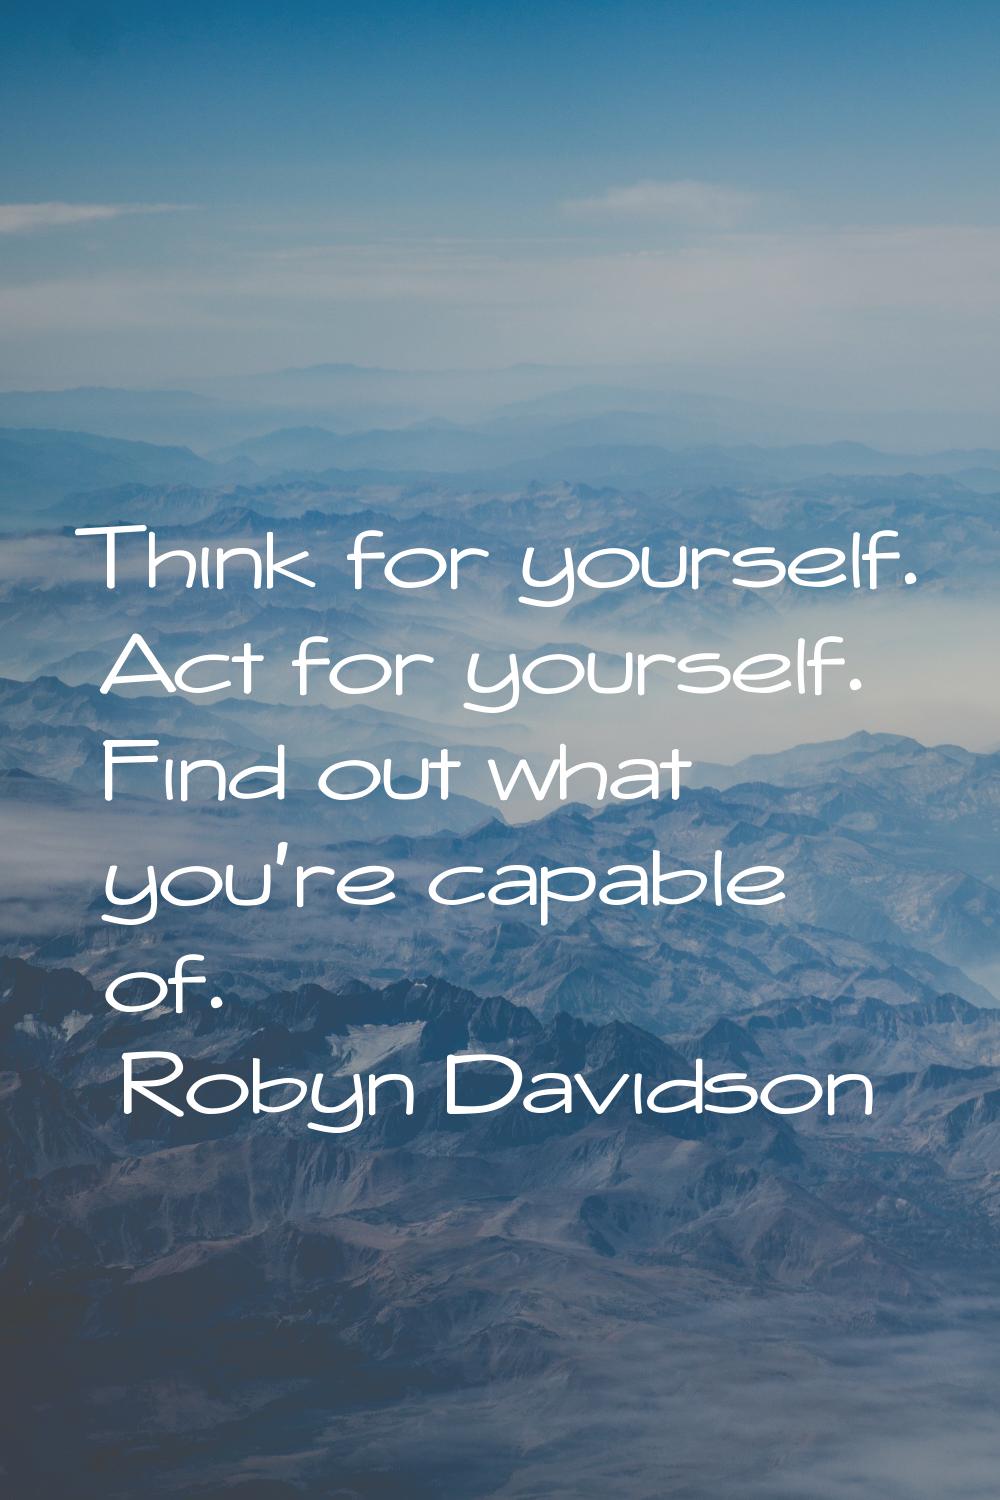 Think for yourself. Act for yourself. Find out what you're capable of.